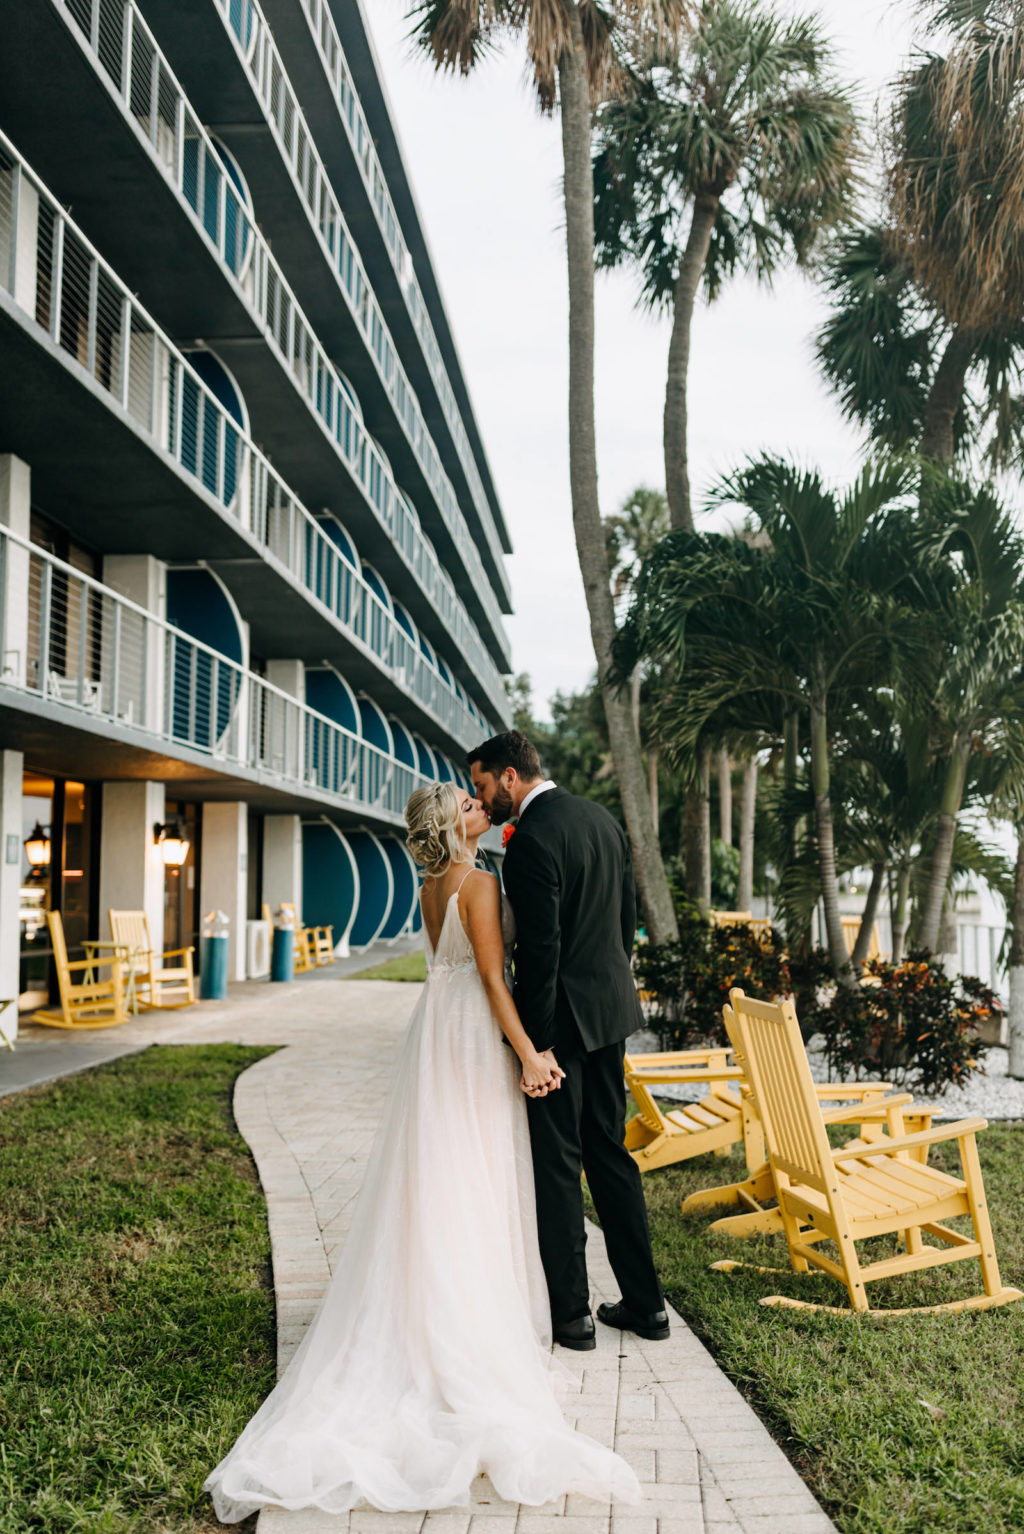 Tampa Bay Bride and Groom in Tropical Modern Wedding Tampa Bay Wedding Venue The Godfrey | Wedding Florist Brides N Blooms | Wedding Planner Elope Tampa Bay | Wedding Dress NIkki's Glitz and Glam | Florida Wedding Hair and Makeup Femme Akoi Beauty Studio | Amber McWhorter Photography